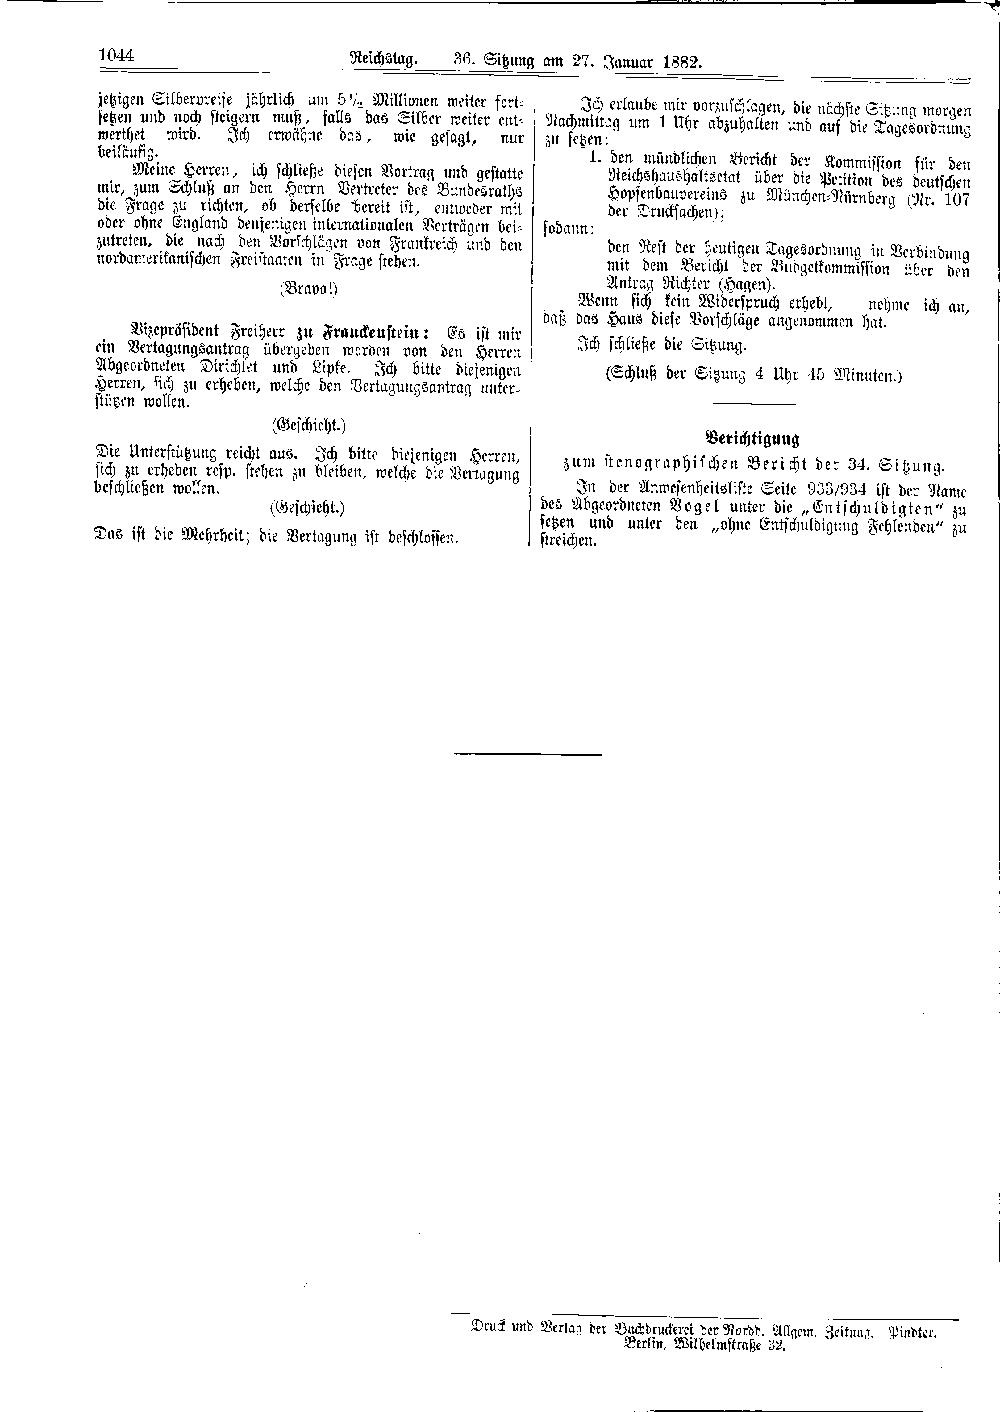 Scan of page 1044